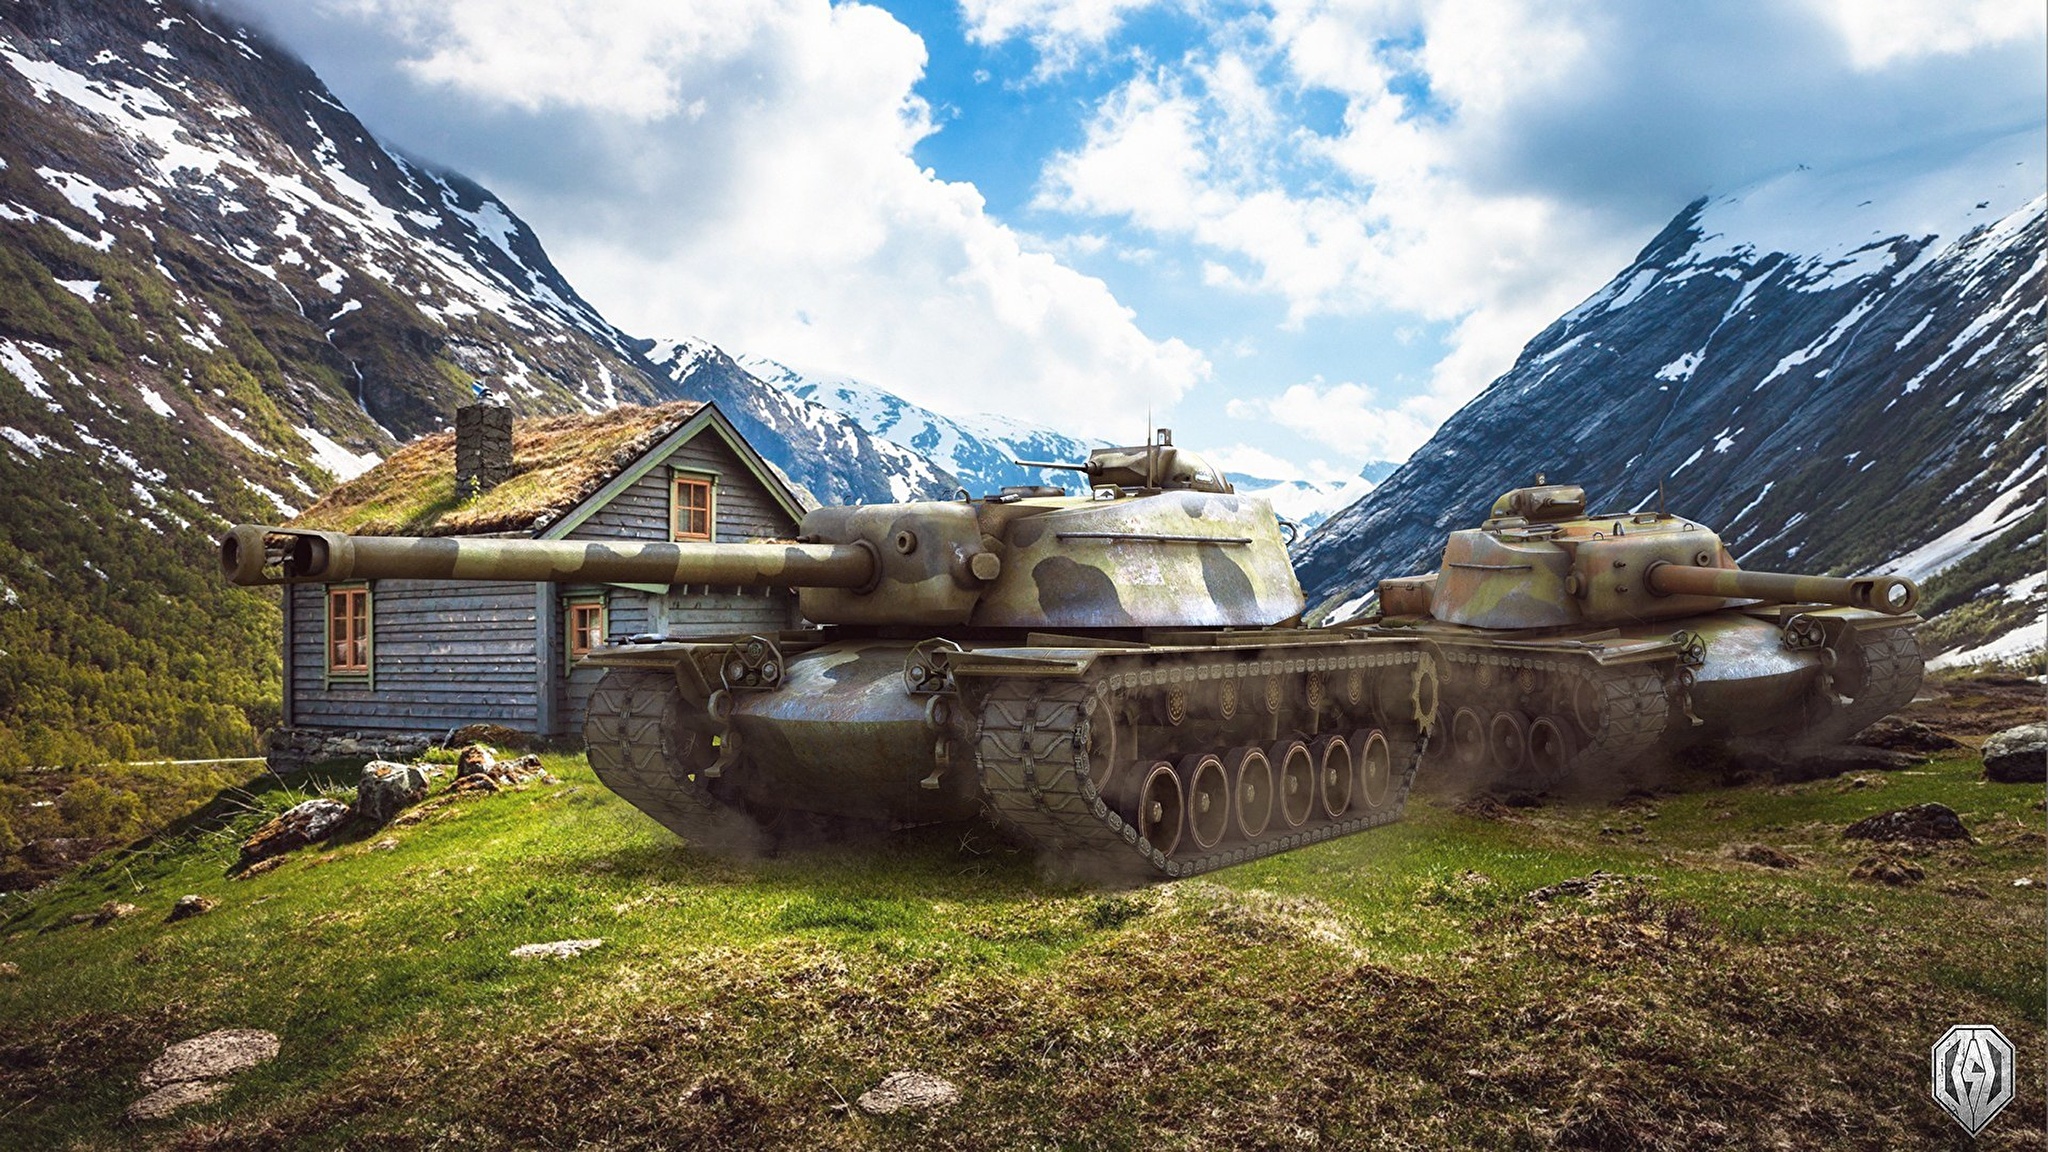 Tanks of worlds фото. Т110е4. Танк т110е4. Т110е4 блиц. Танк т110е4 в World of Tanks.